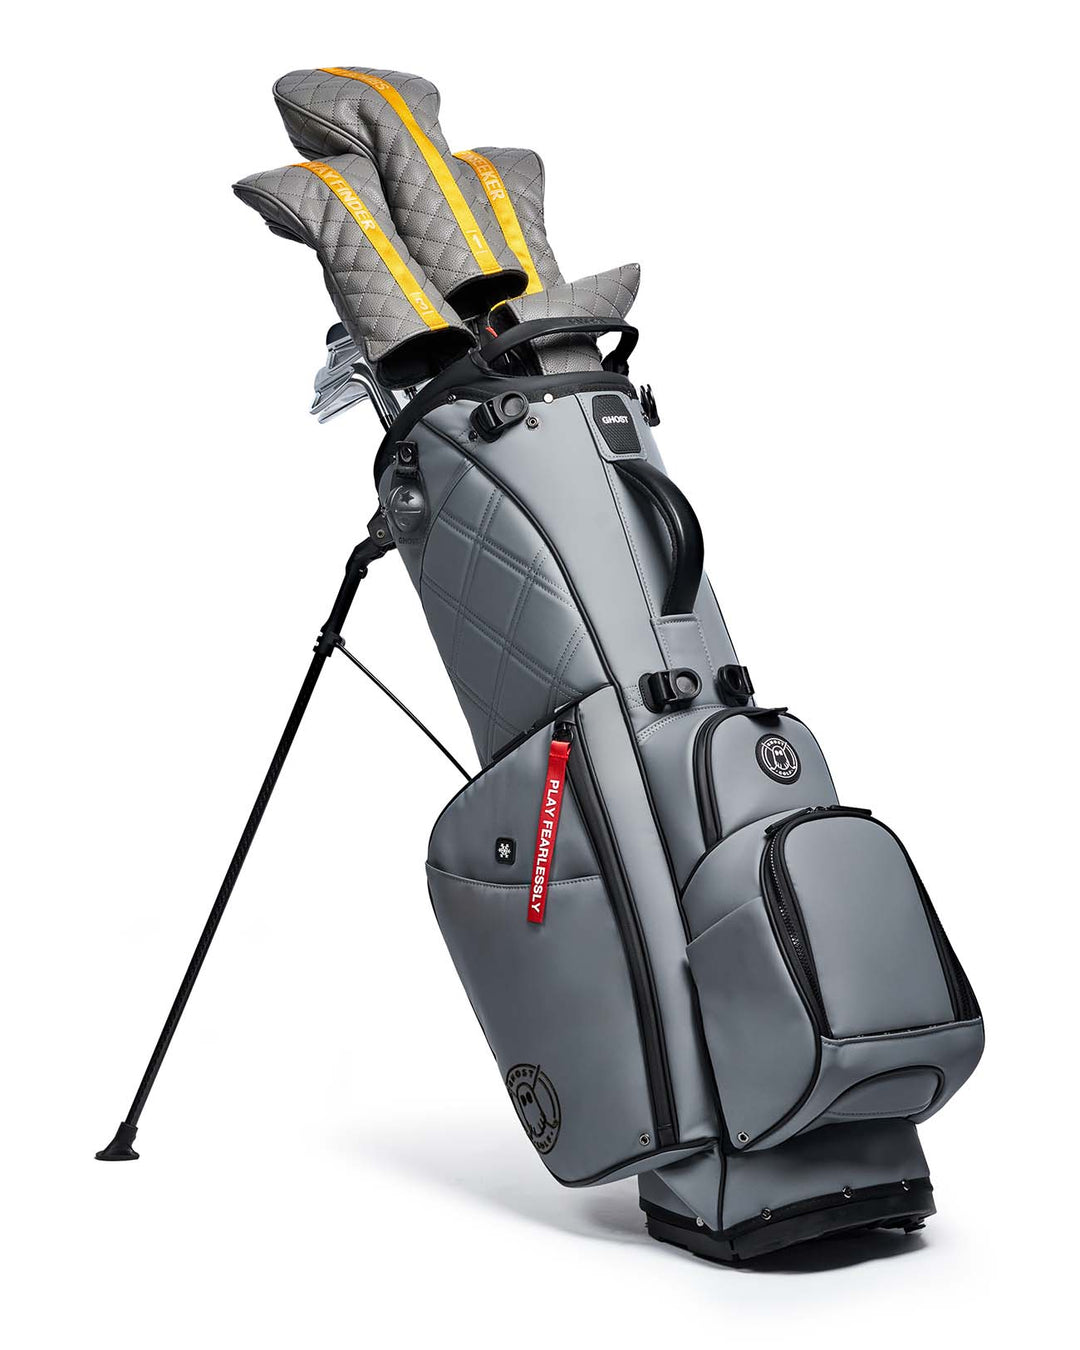 Ghost Golf Maverick Grey Golf Bag with Red Tags and Golf Clubs with Grey Head Covers